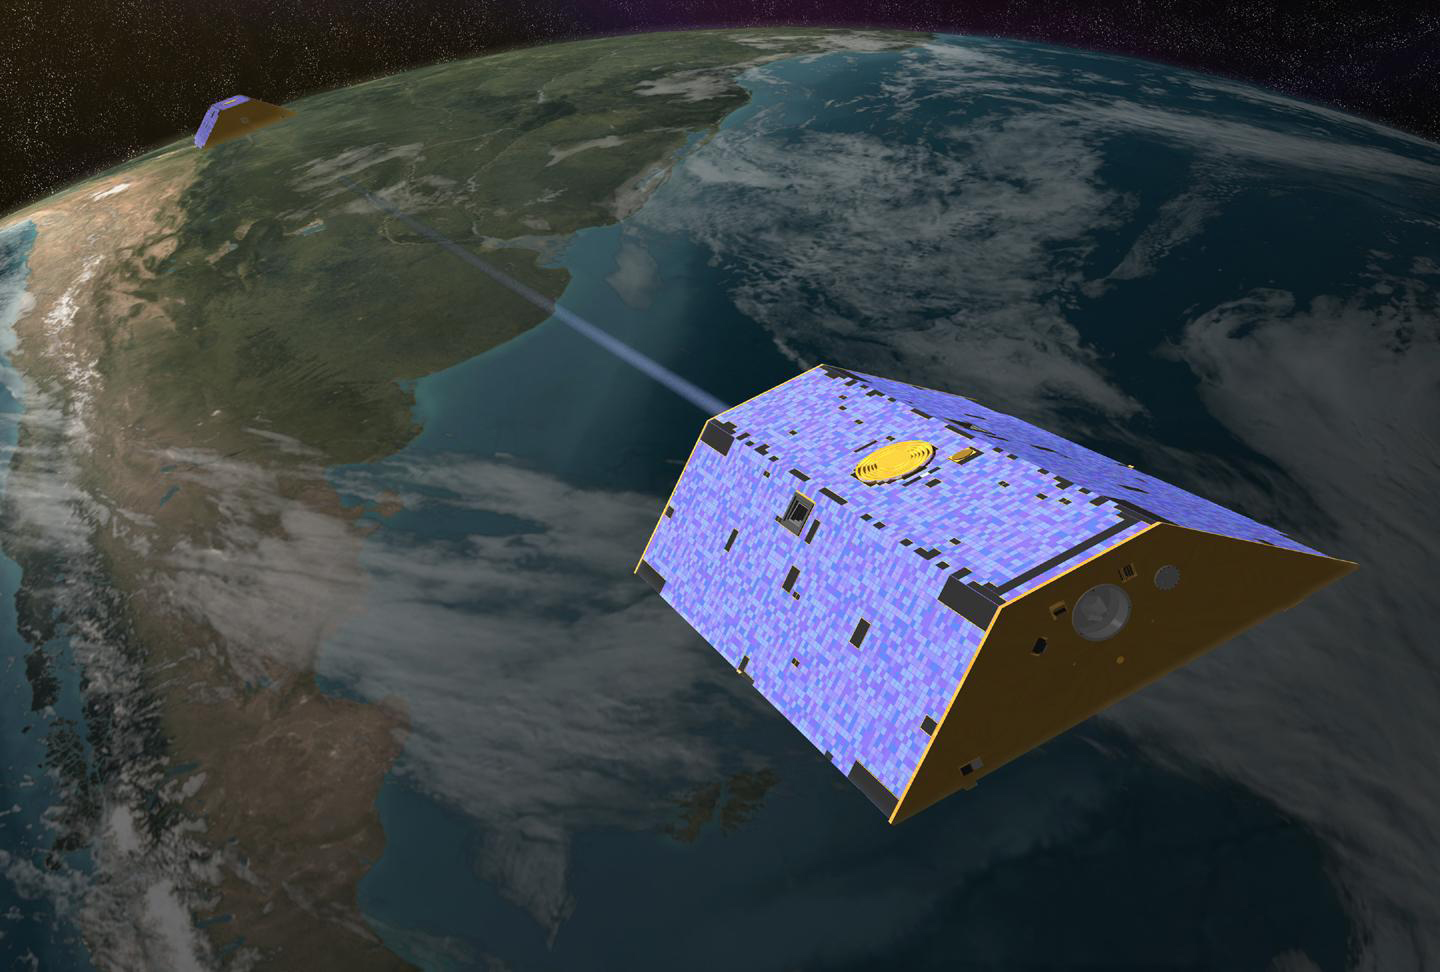 Artist's rendering of the two GRACE satellites, which have providing 15 years of insights into how our planet is changing